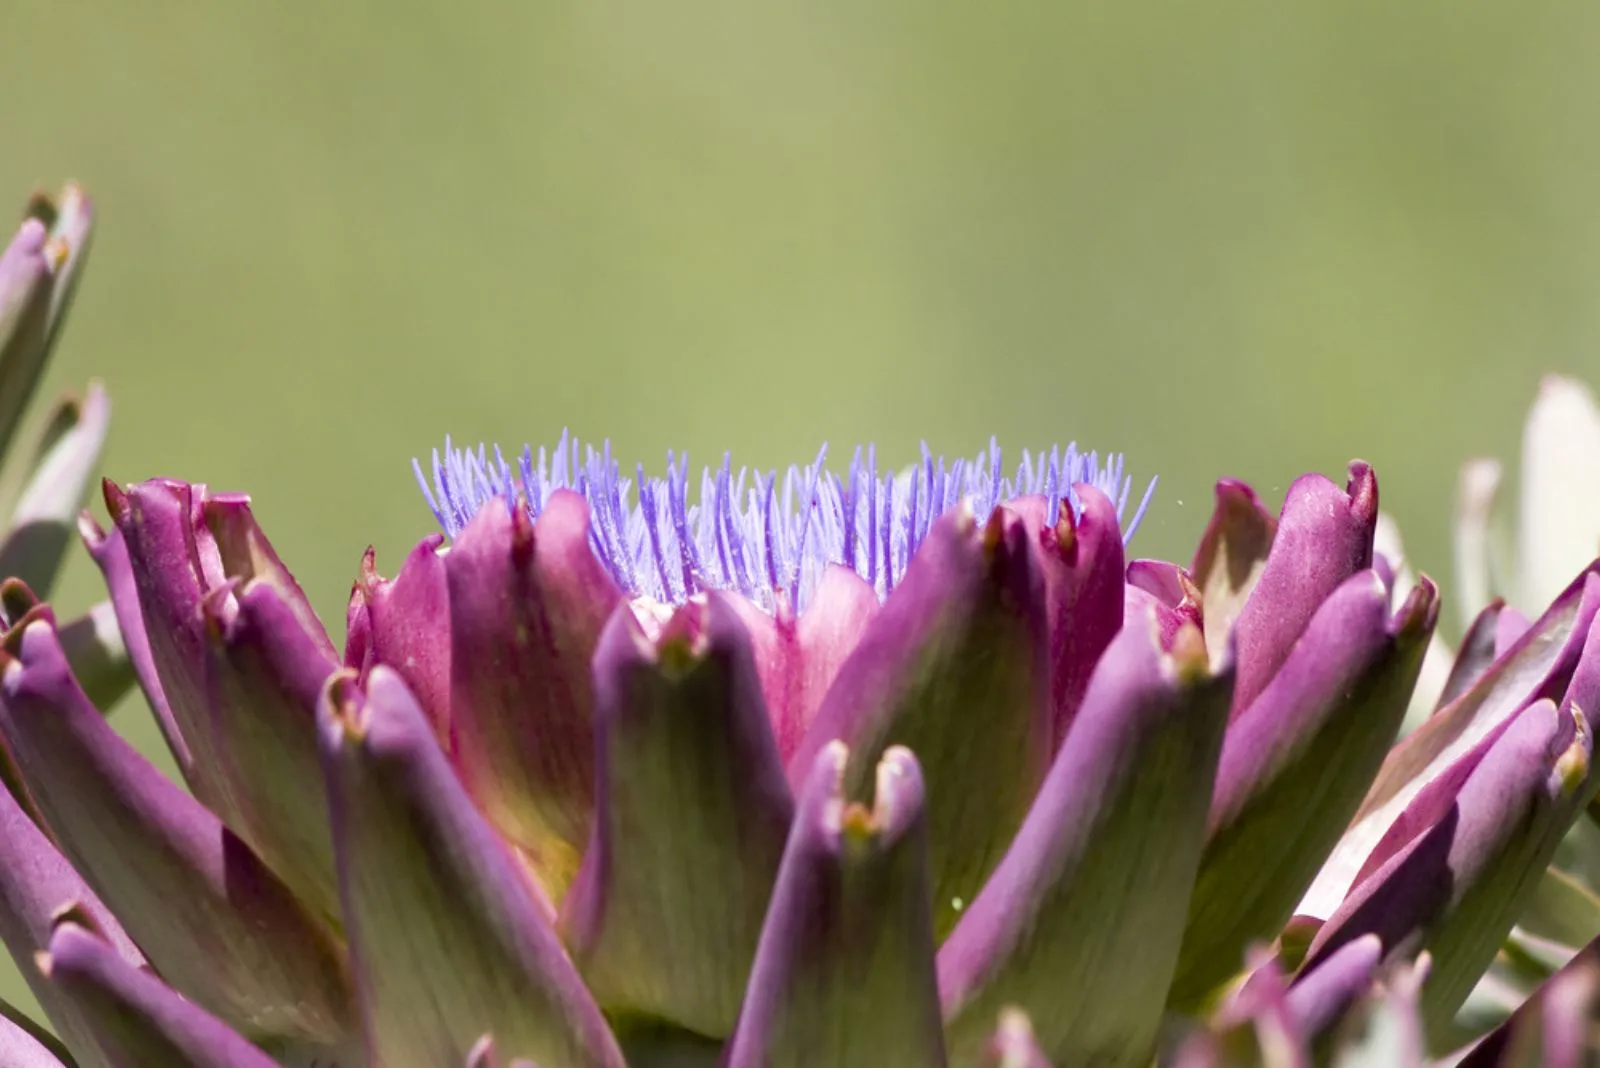 Single artichoke flower with edible petal in foreground